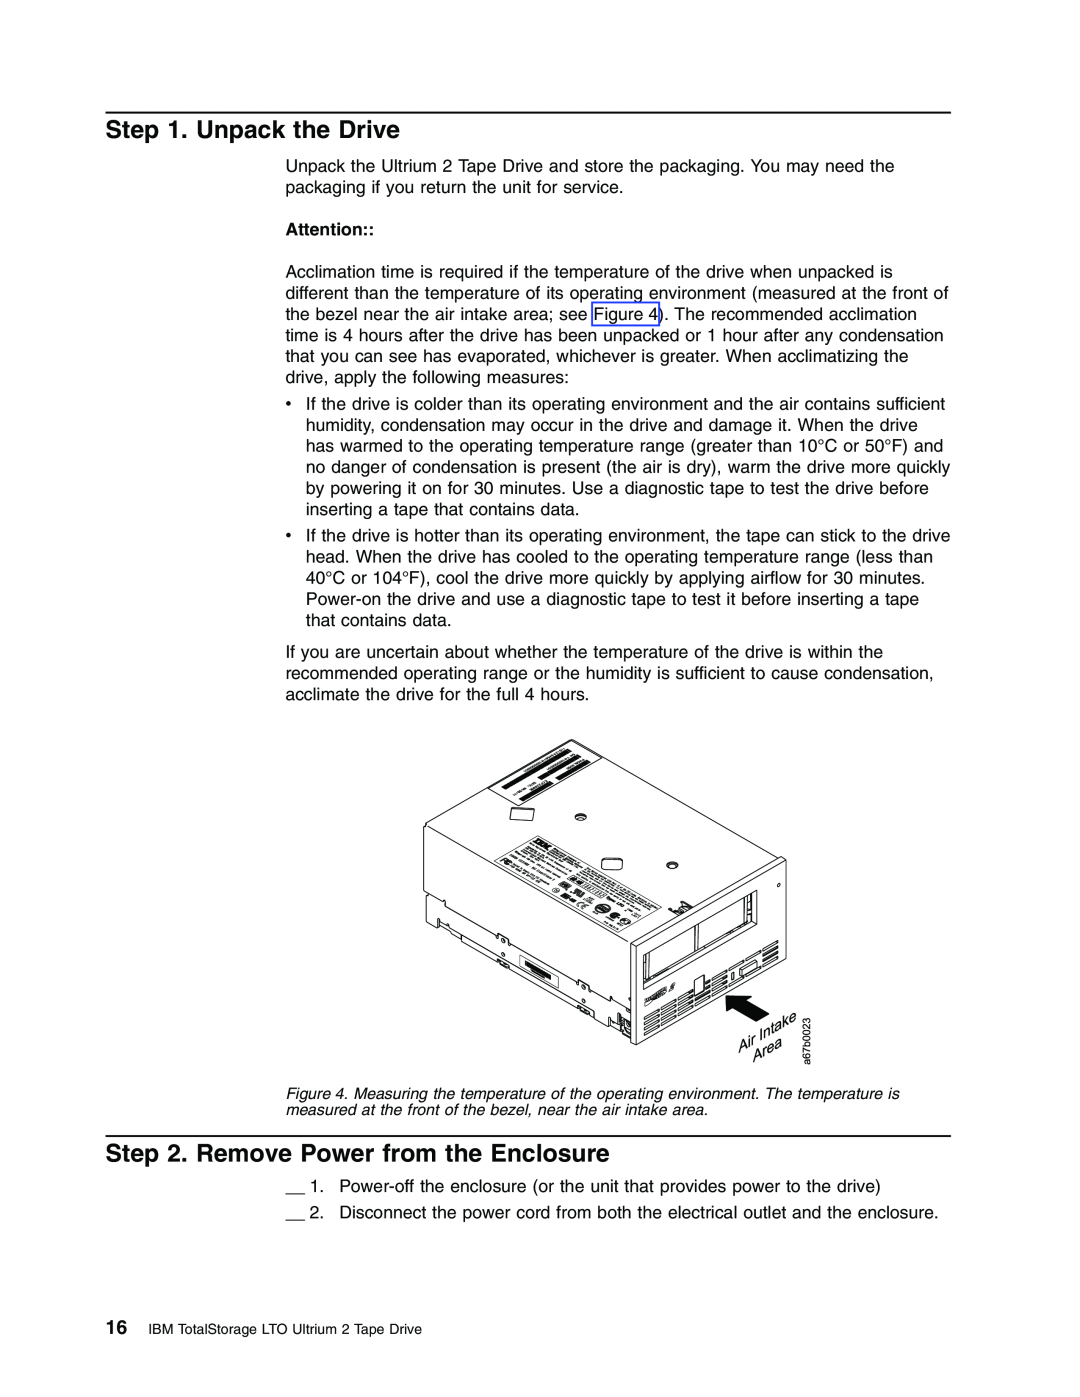 IBM T400F manual Unpack the Drive, Remove Power from the Enclosure, IBM TotalStorage LTO Ultrium 2 Tape Drive 